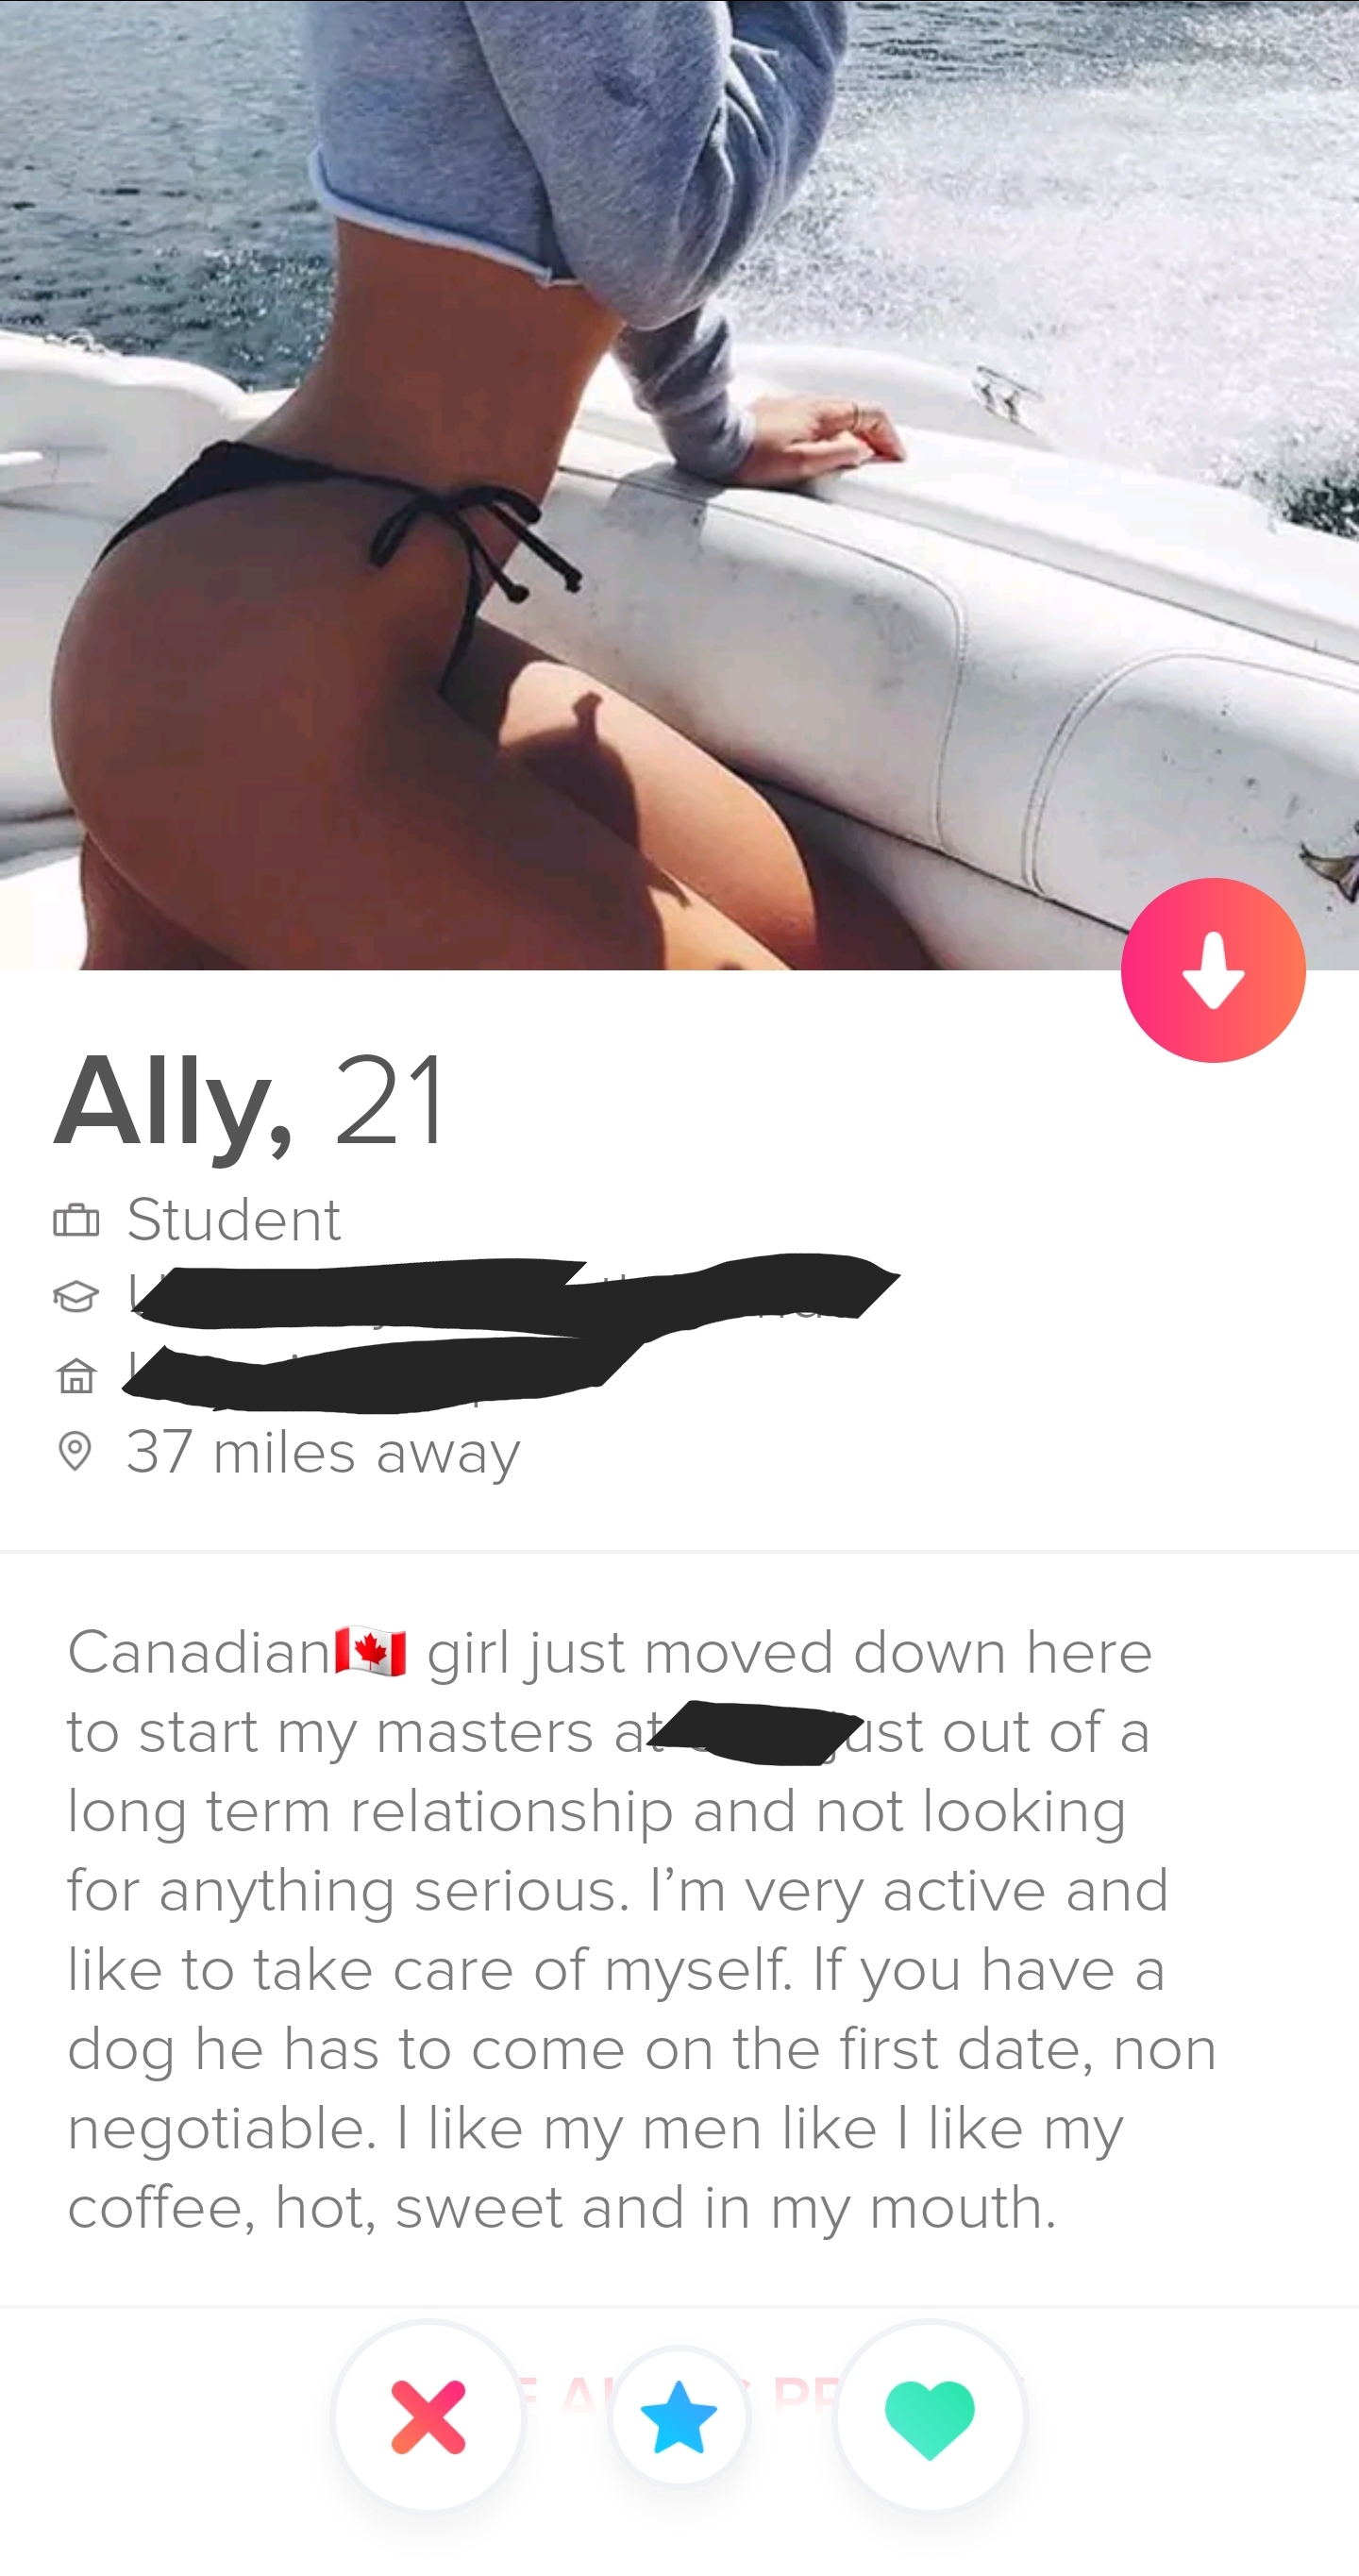 tinder - arm - Ally, 21 Student 37 miles away Canadian girl just moved down here to start my masters a s out of a long term relationship and not looking for anything serious. I'm very active and to take care of myself. If you have a dog he has to come on 